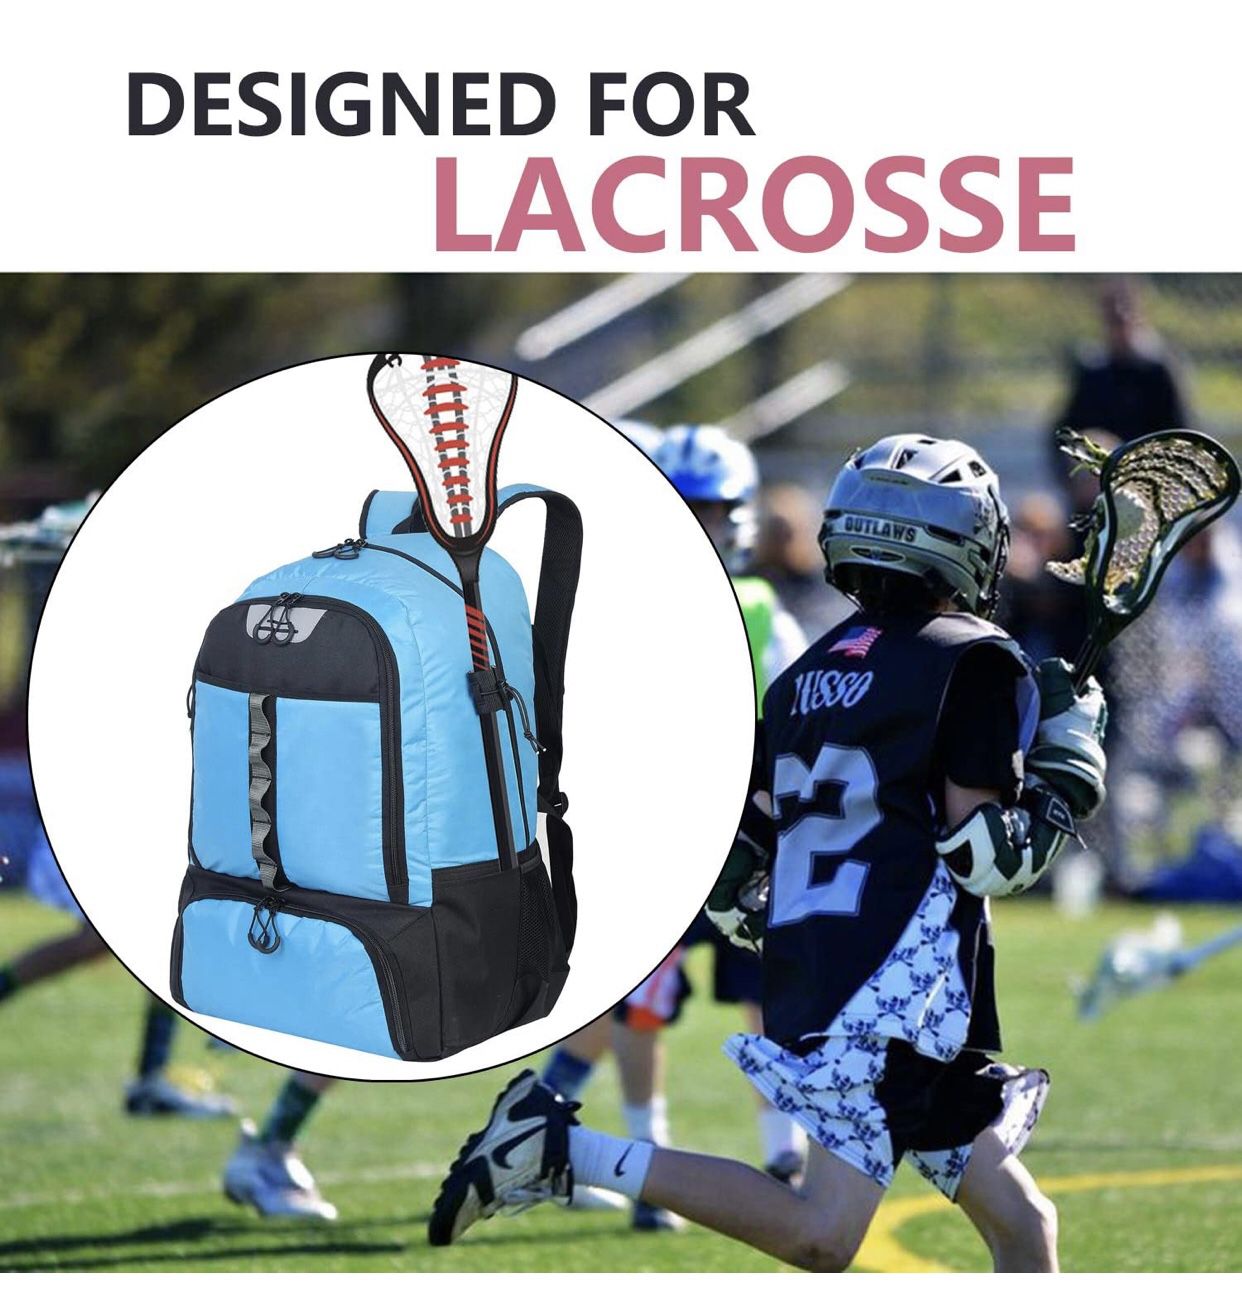 G GATRIAL Lacrosse-Backpack Lacrosse-Bag Field Hockey-Bag - Extra Large Holds All Lacrosse Equipment Two Stick Holders and Separate Cleats Compartment